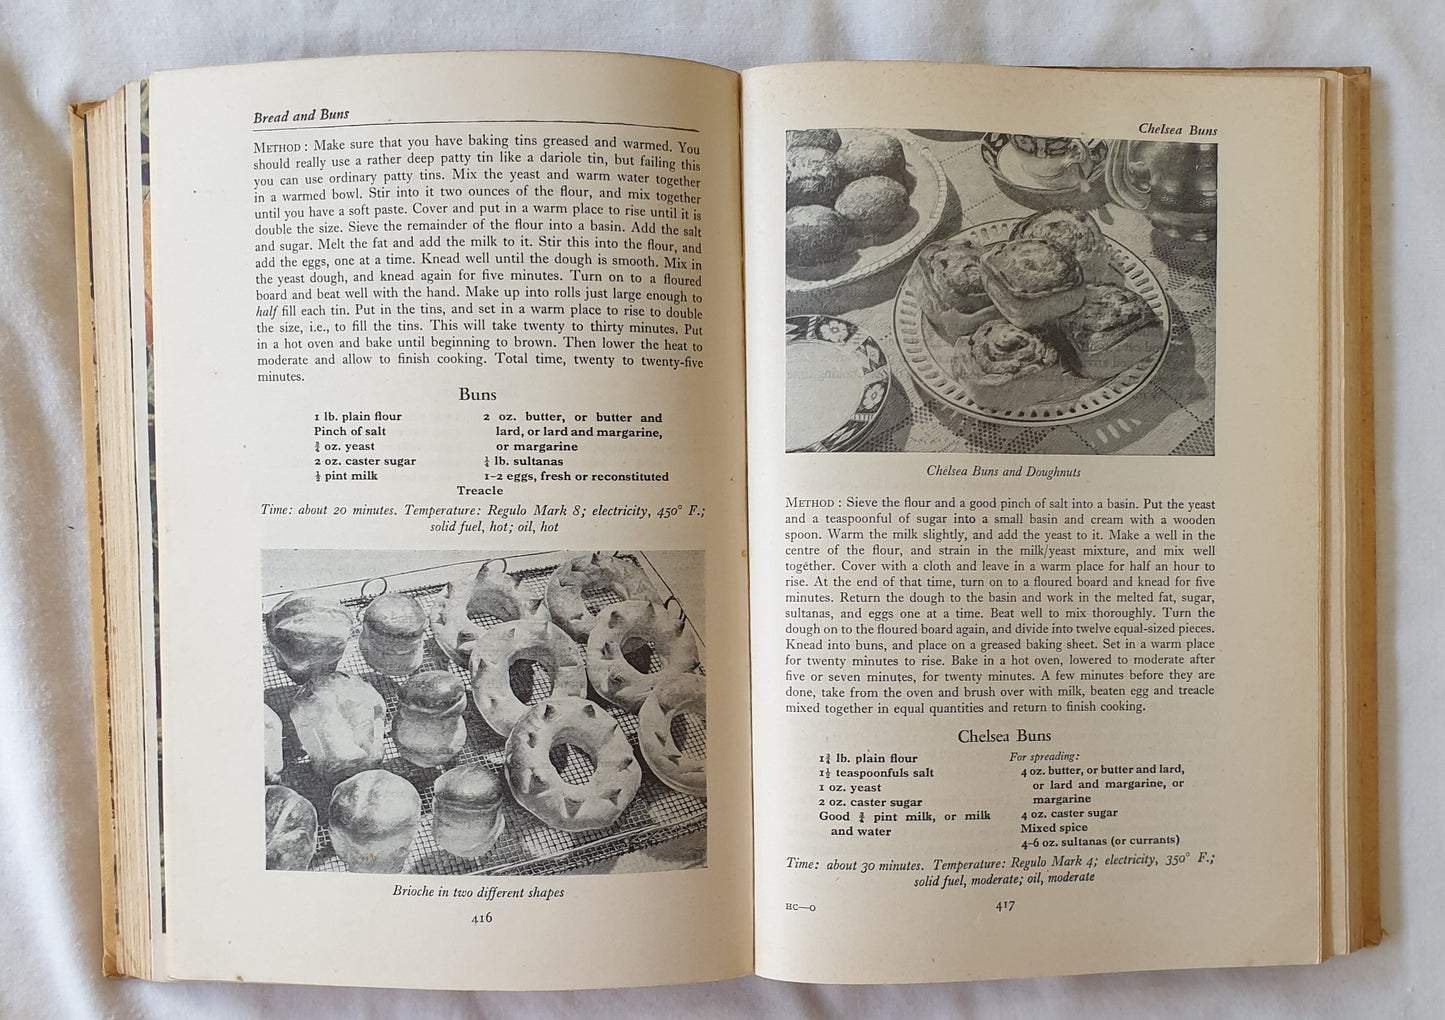 Practical Cookery for All by Blanche Anding et al.